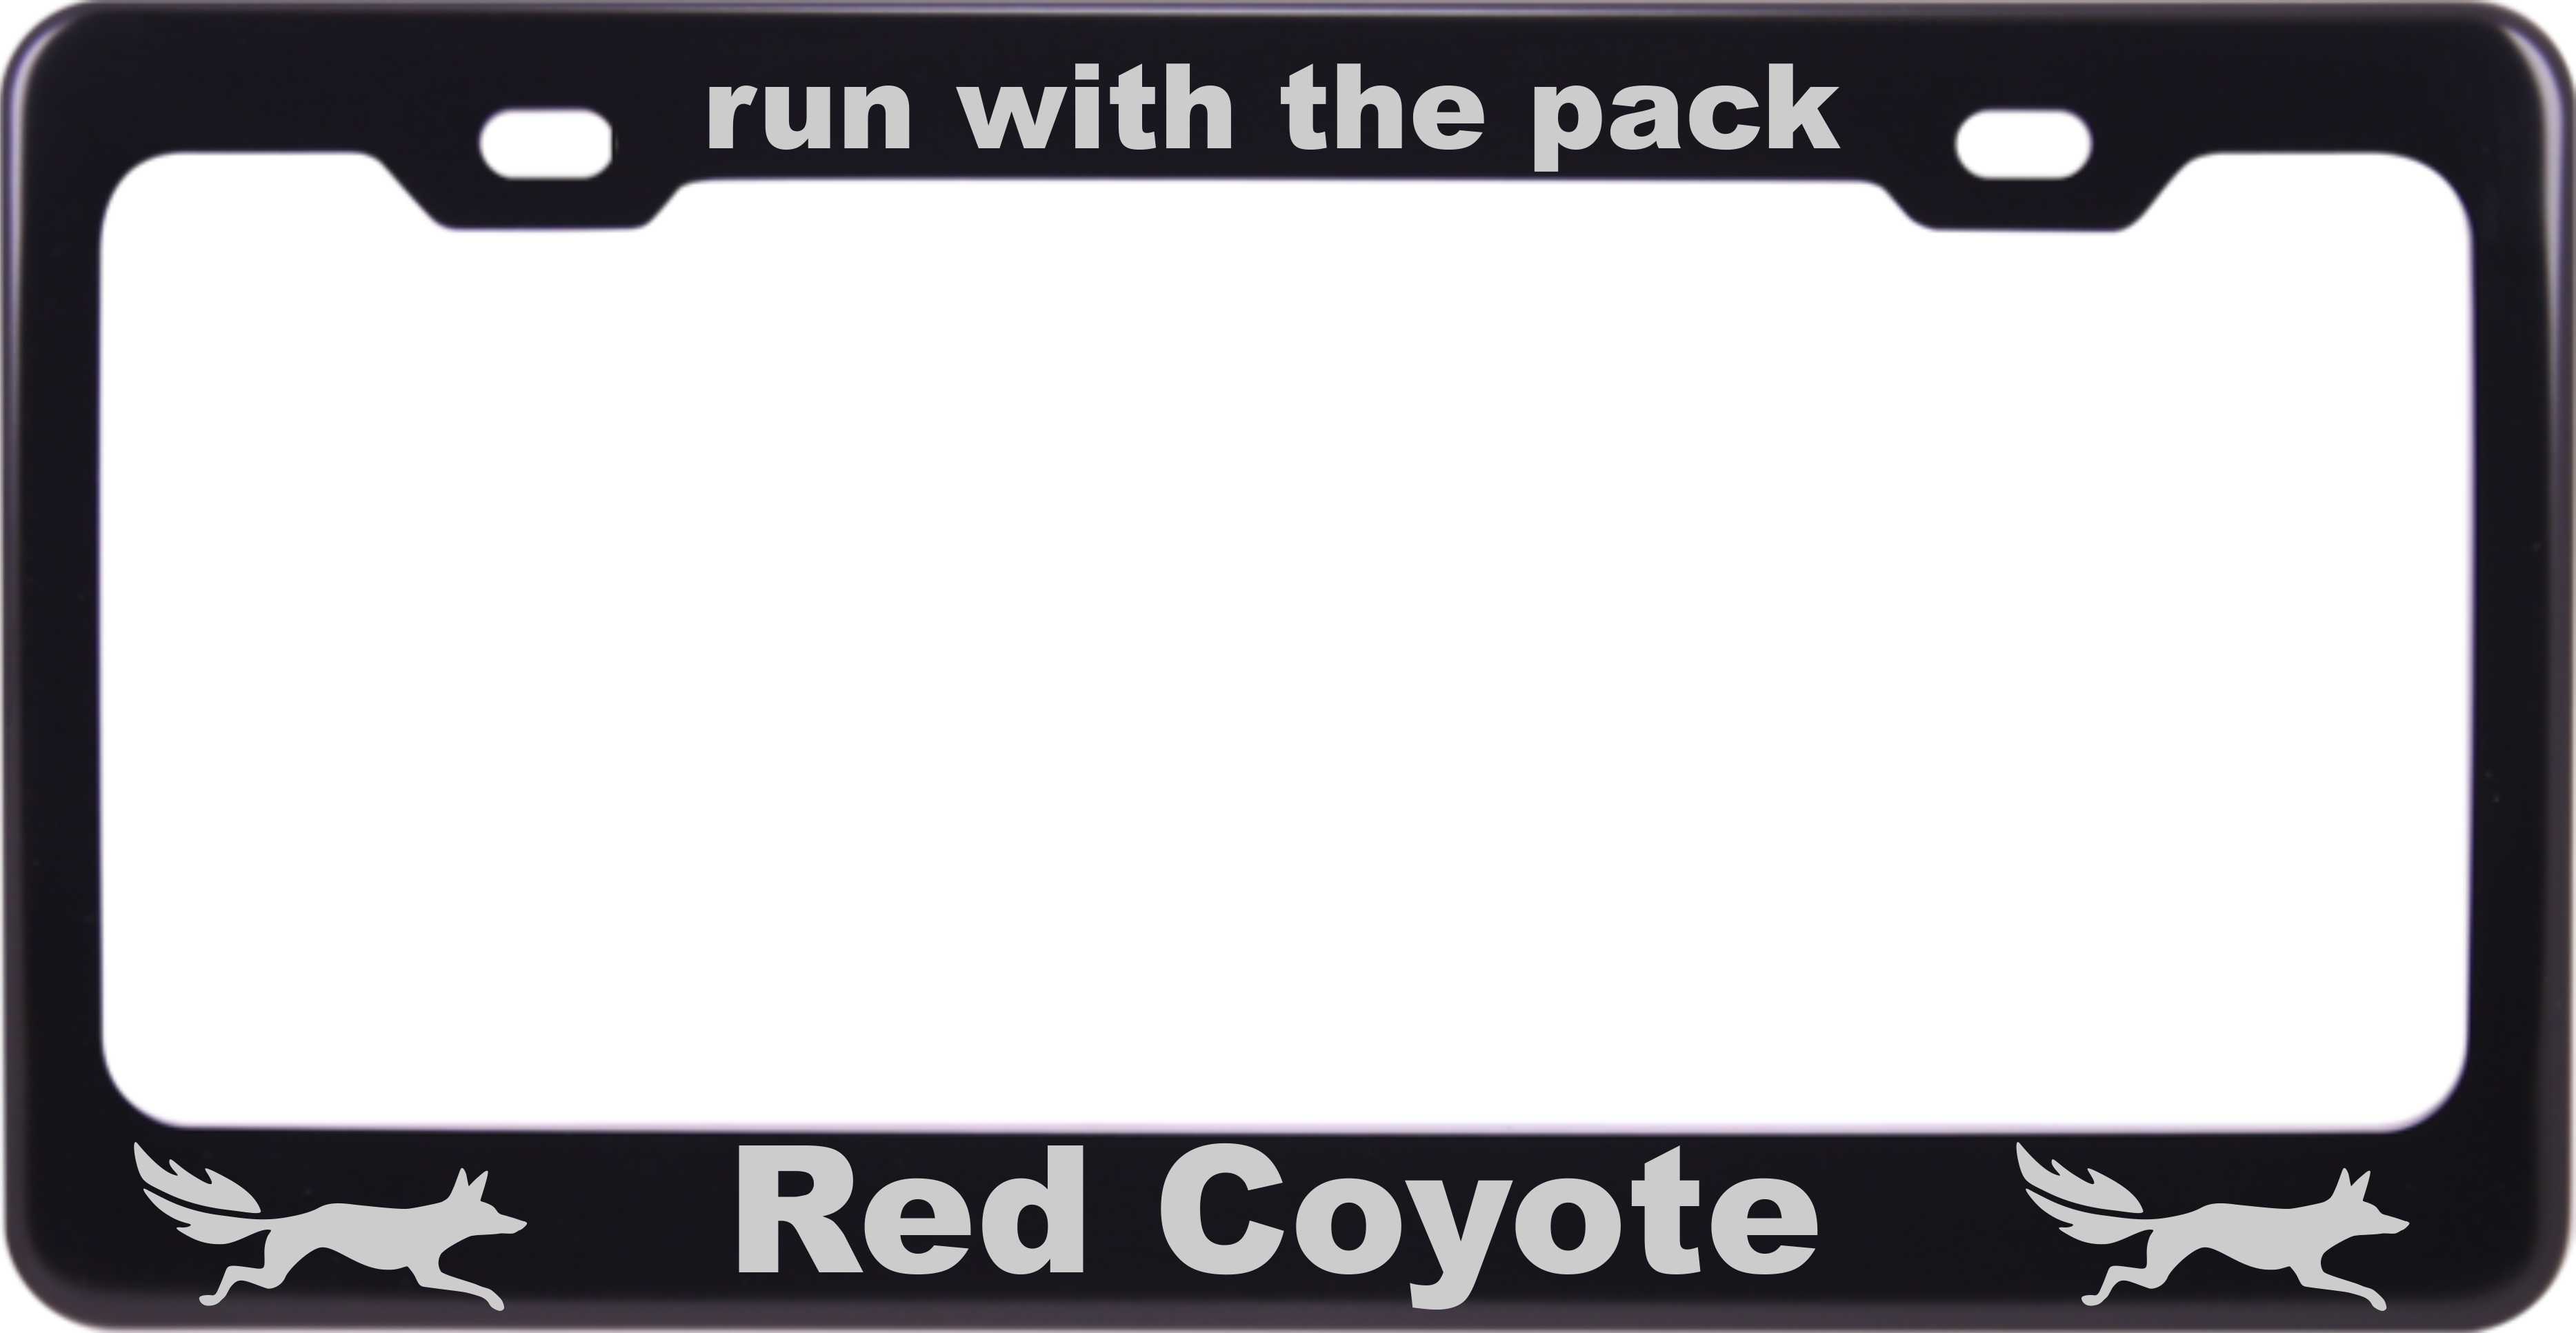 Red Coyote